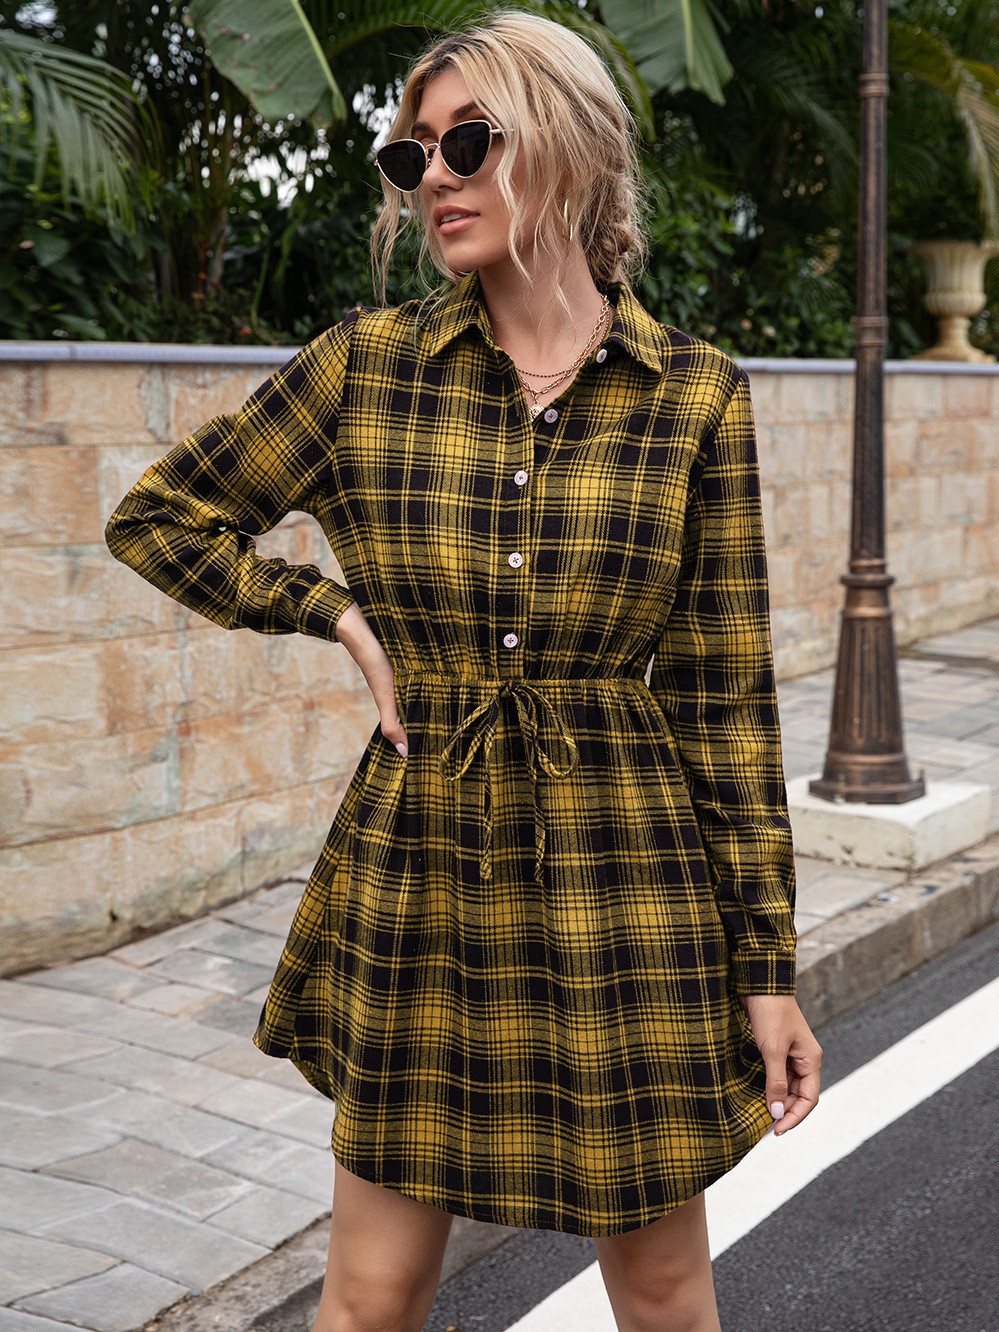 Leisure Mid-length Cinched Plaid Dress Top Shirt Women's Clothing Casual Dresses